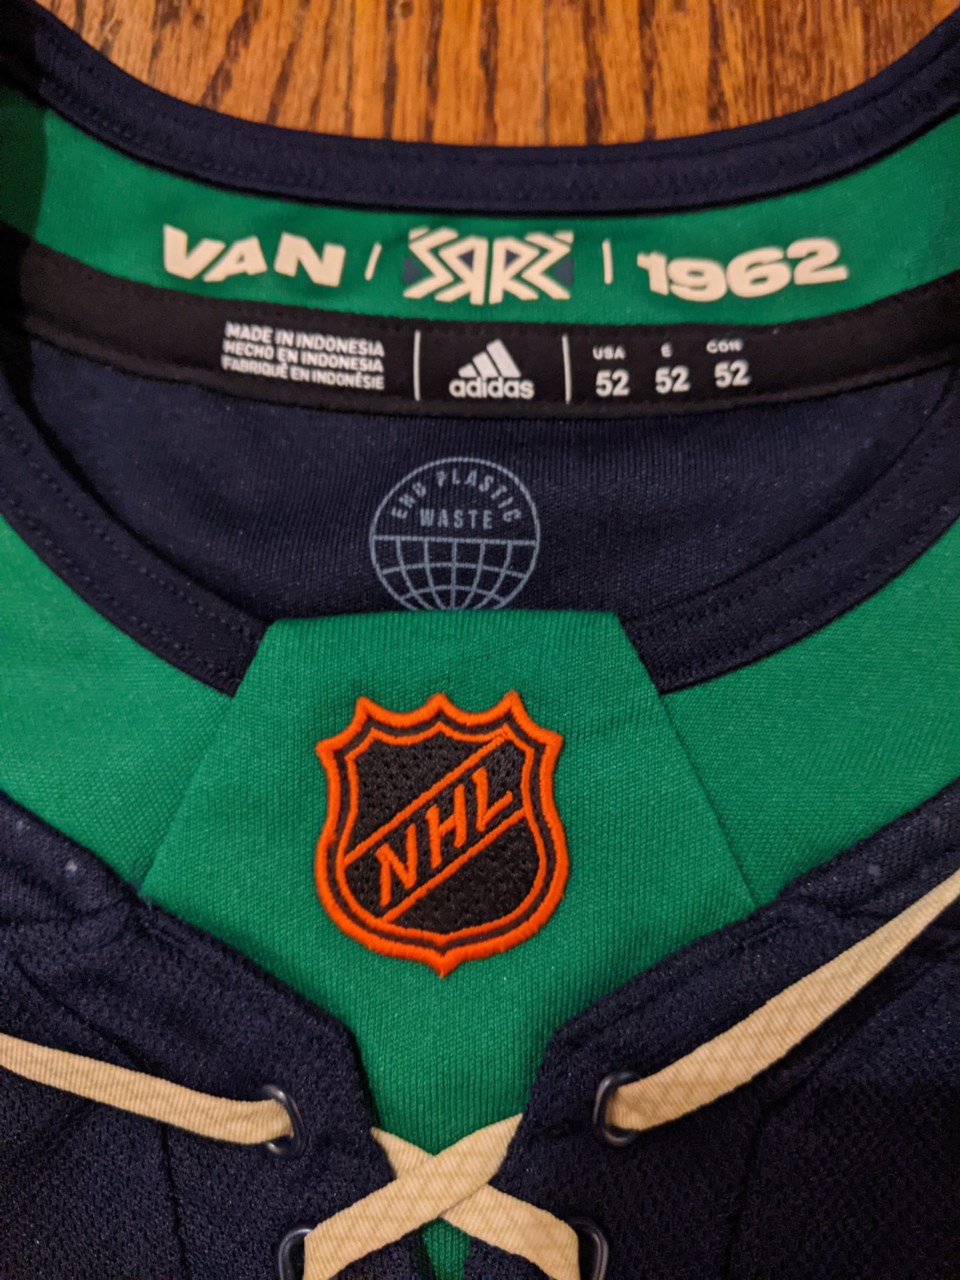 Canucks Rewind: the debut of the Millionaires jerseys